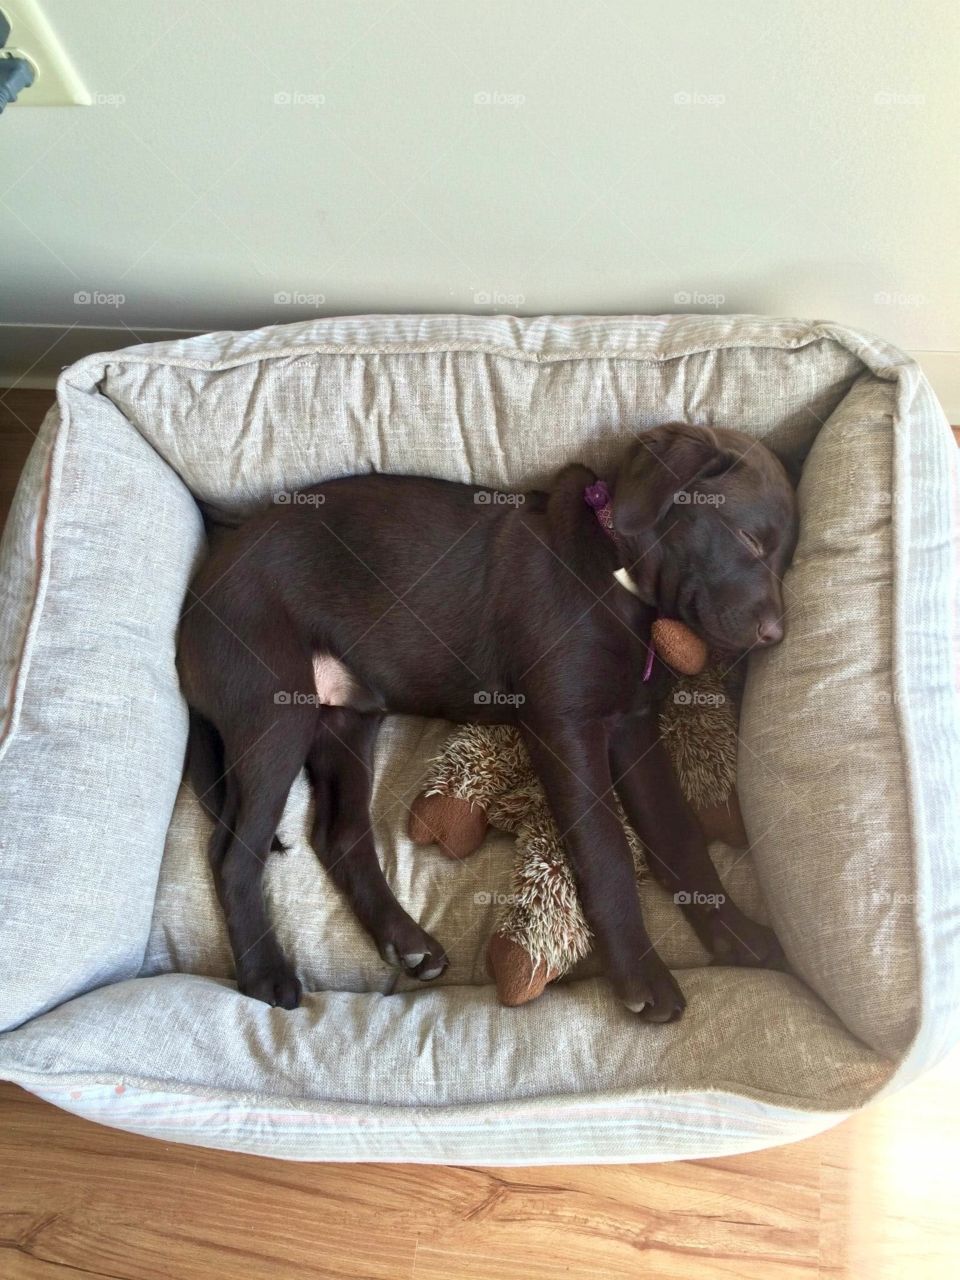 Lacie 14 weeks. Snuggled in her dog bed